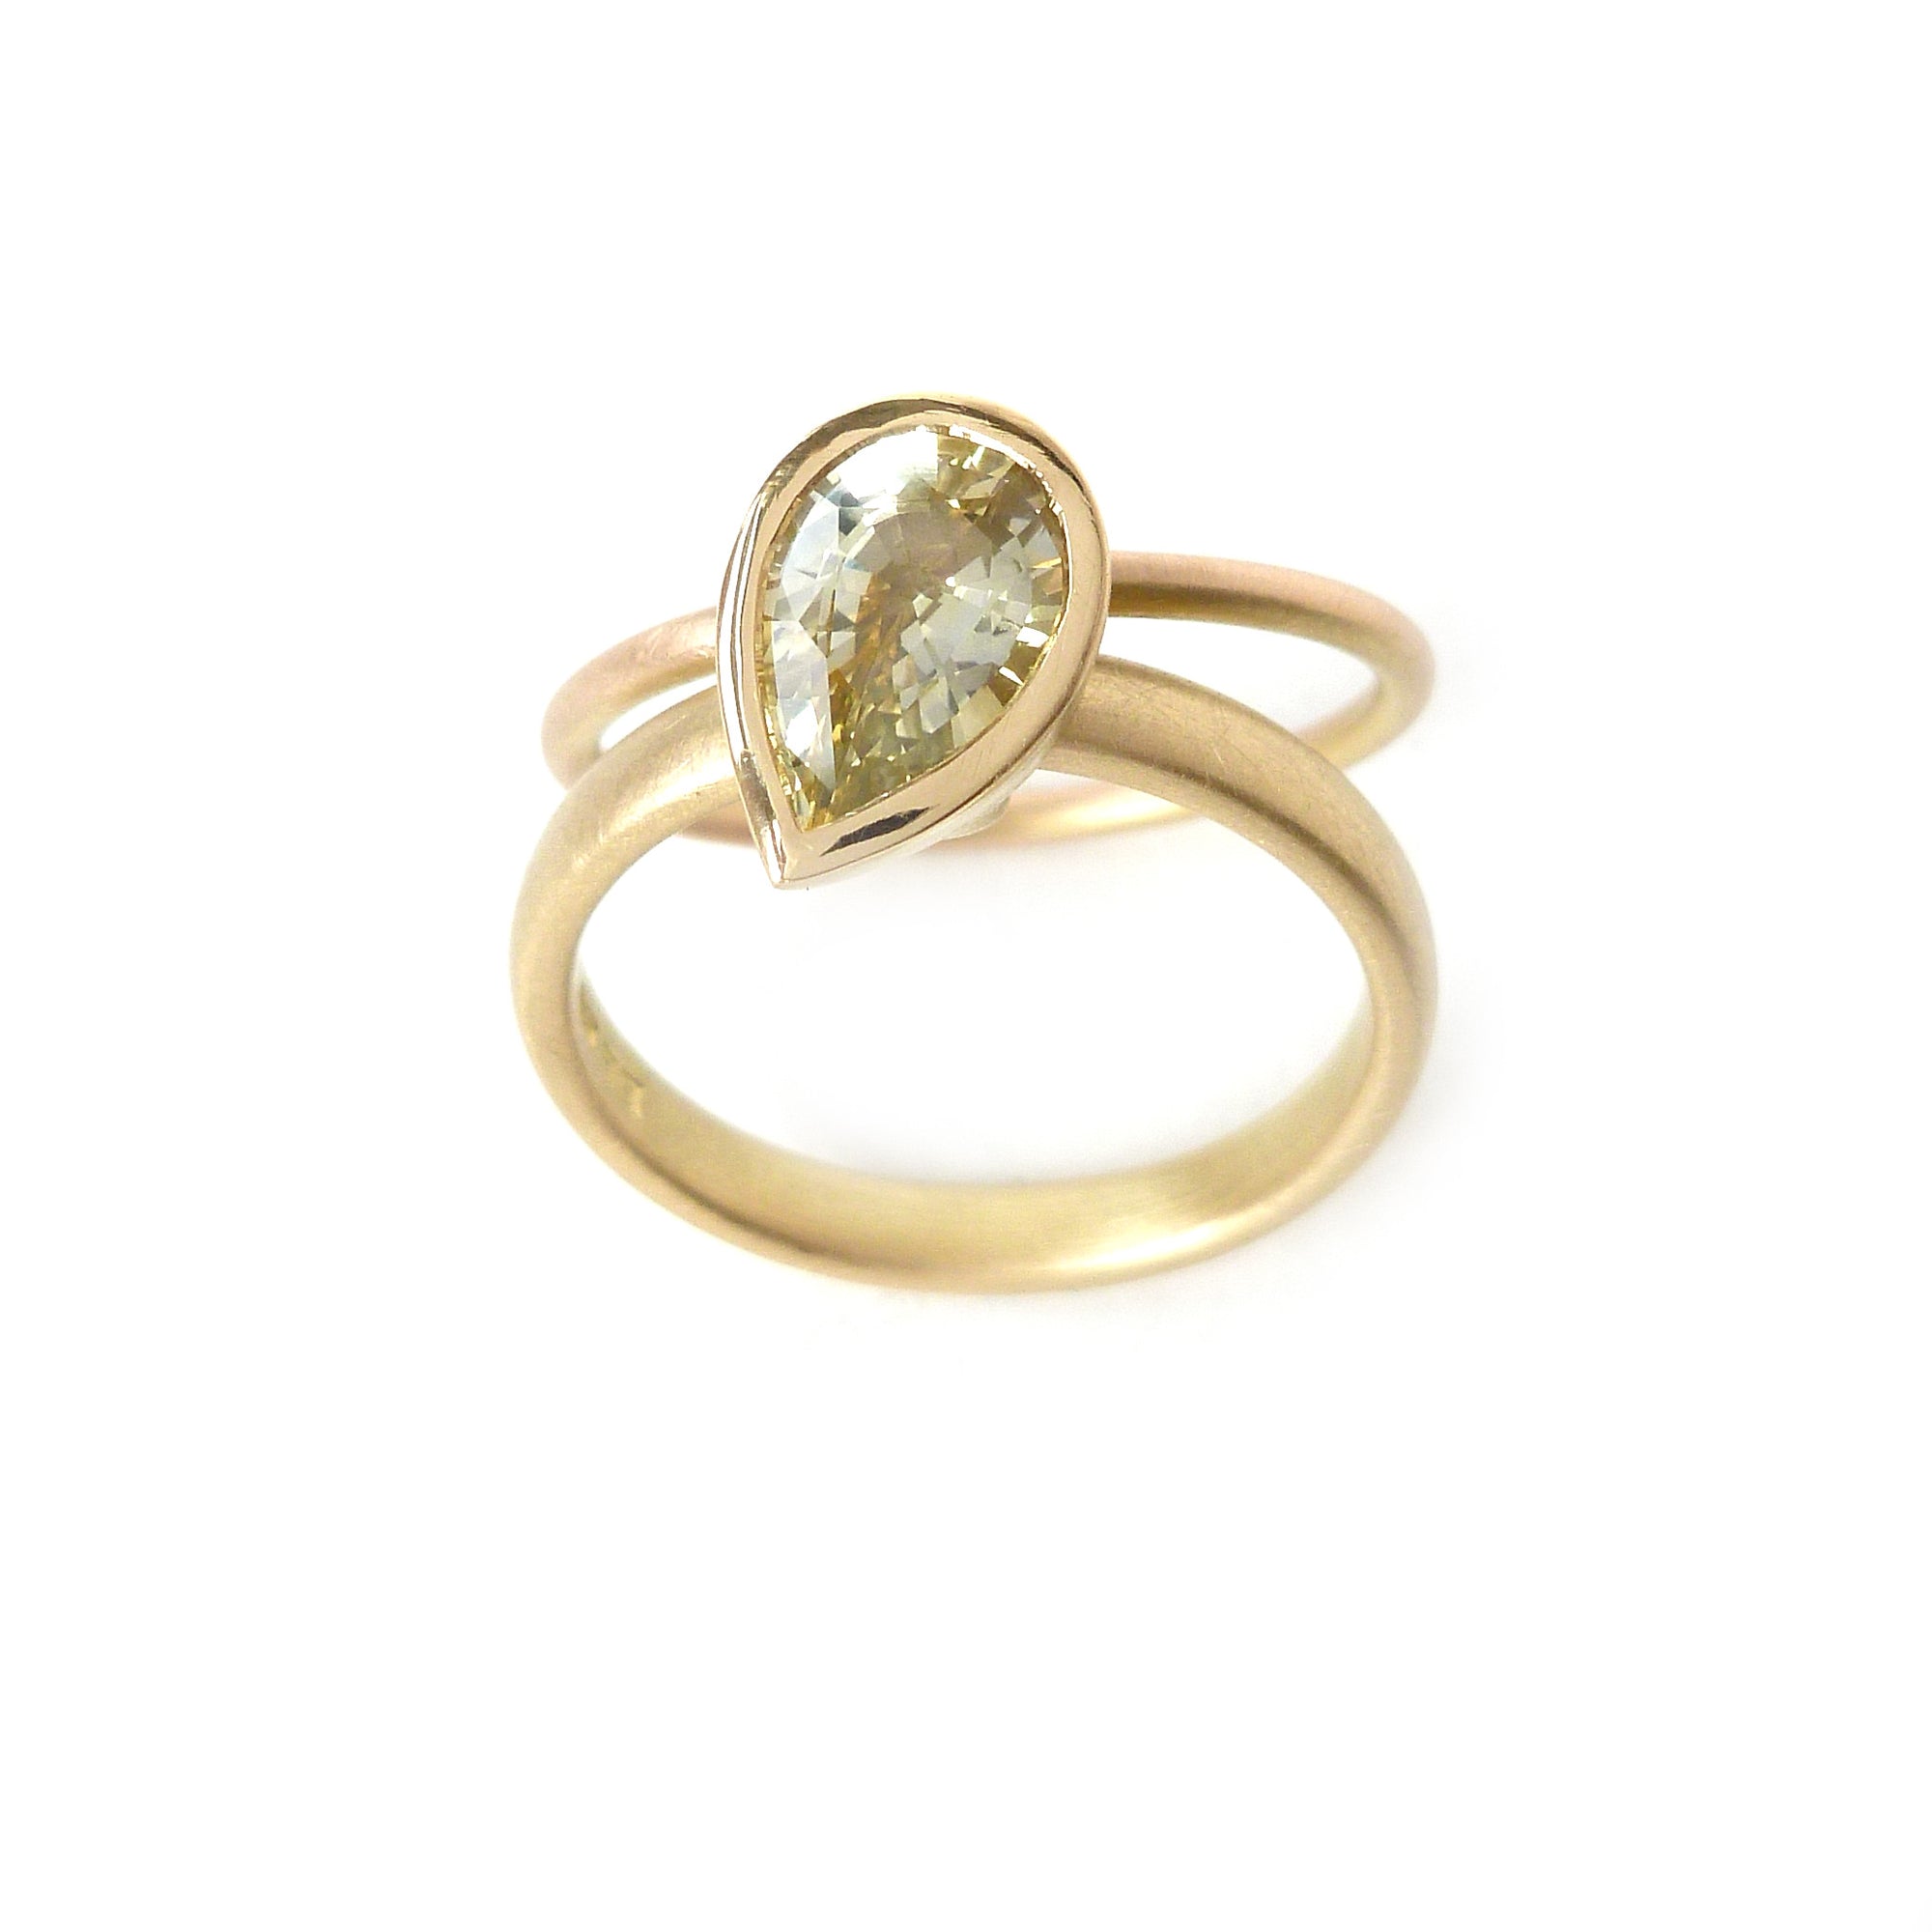 Unique, modern and contemporary ring, set with a beautiful green sapphire. Perfect for a alternative wedding and engagement ring. Handmade in UK by Sue Lane.